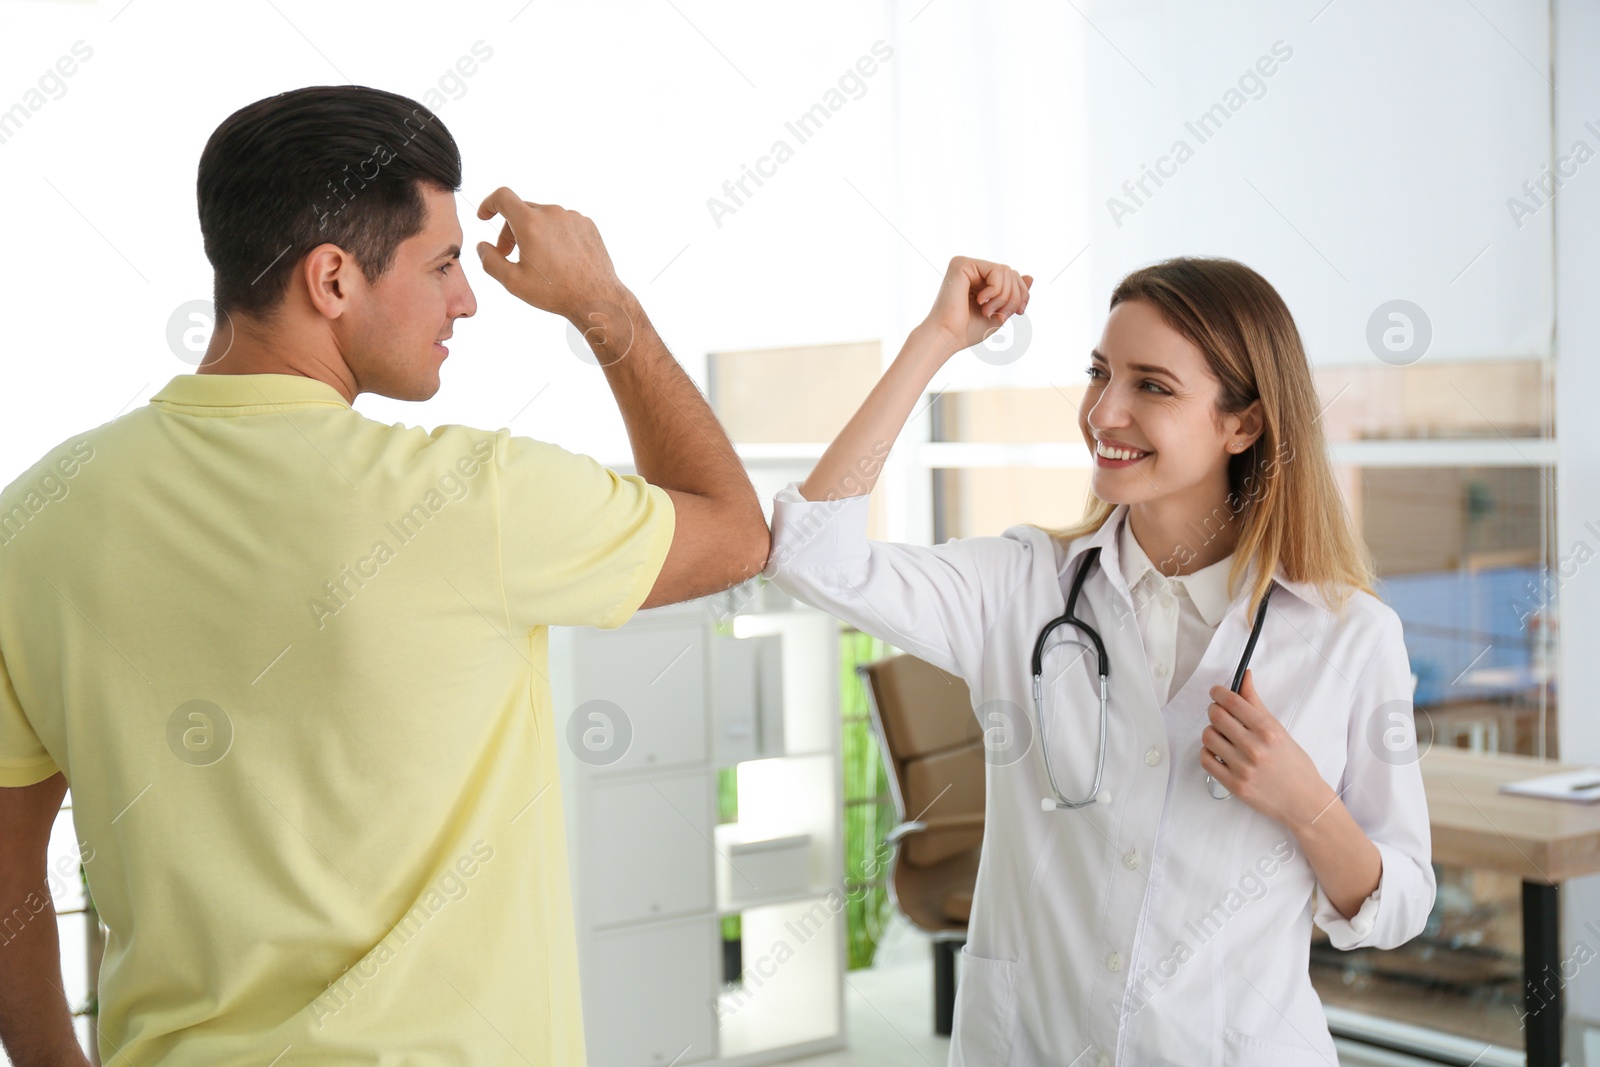 Photo of Doctor and patient doing elbow bump instead of handshake in clinic. New greeting during COVID-19 pandemic